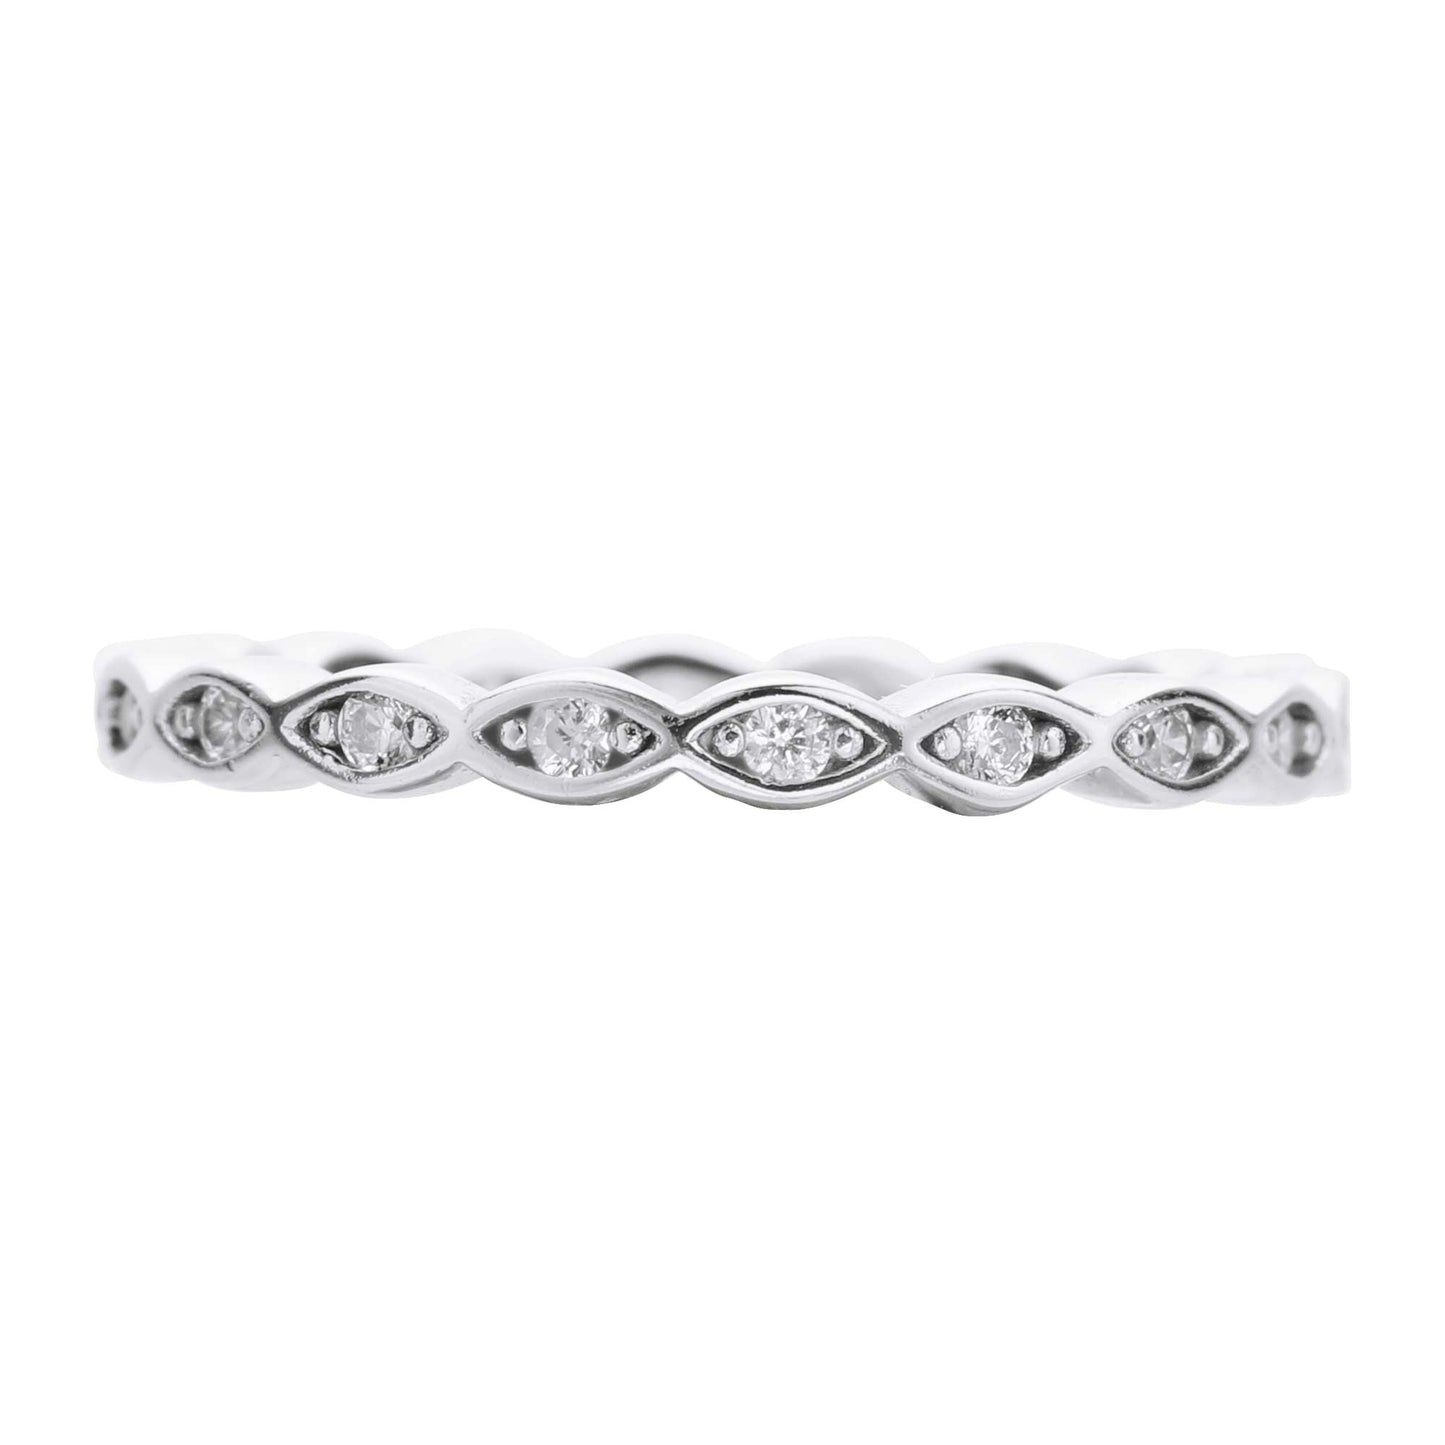 A silver scalloped ring band set with small clear stones.